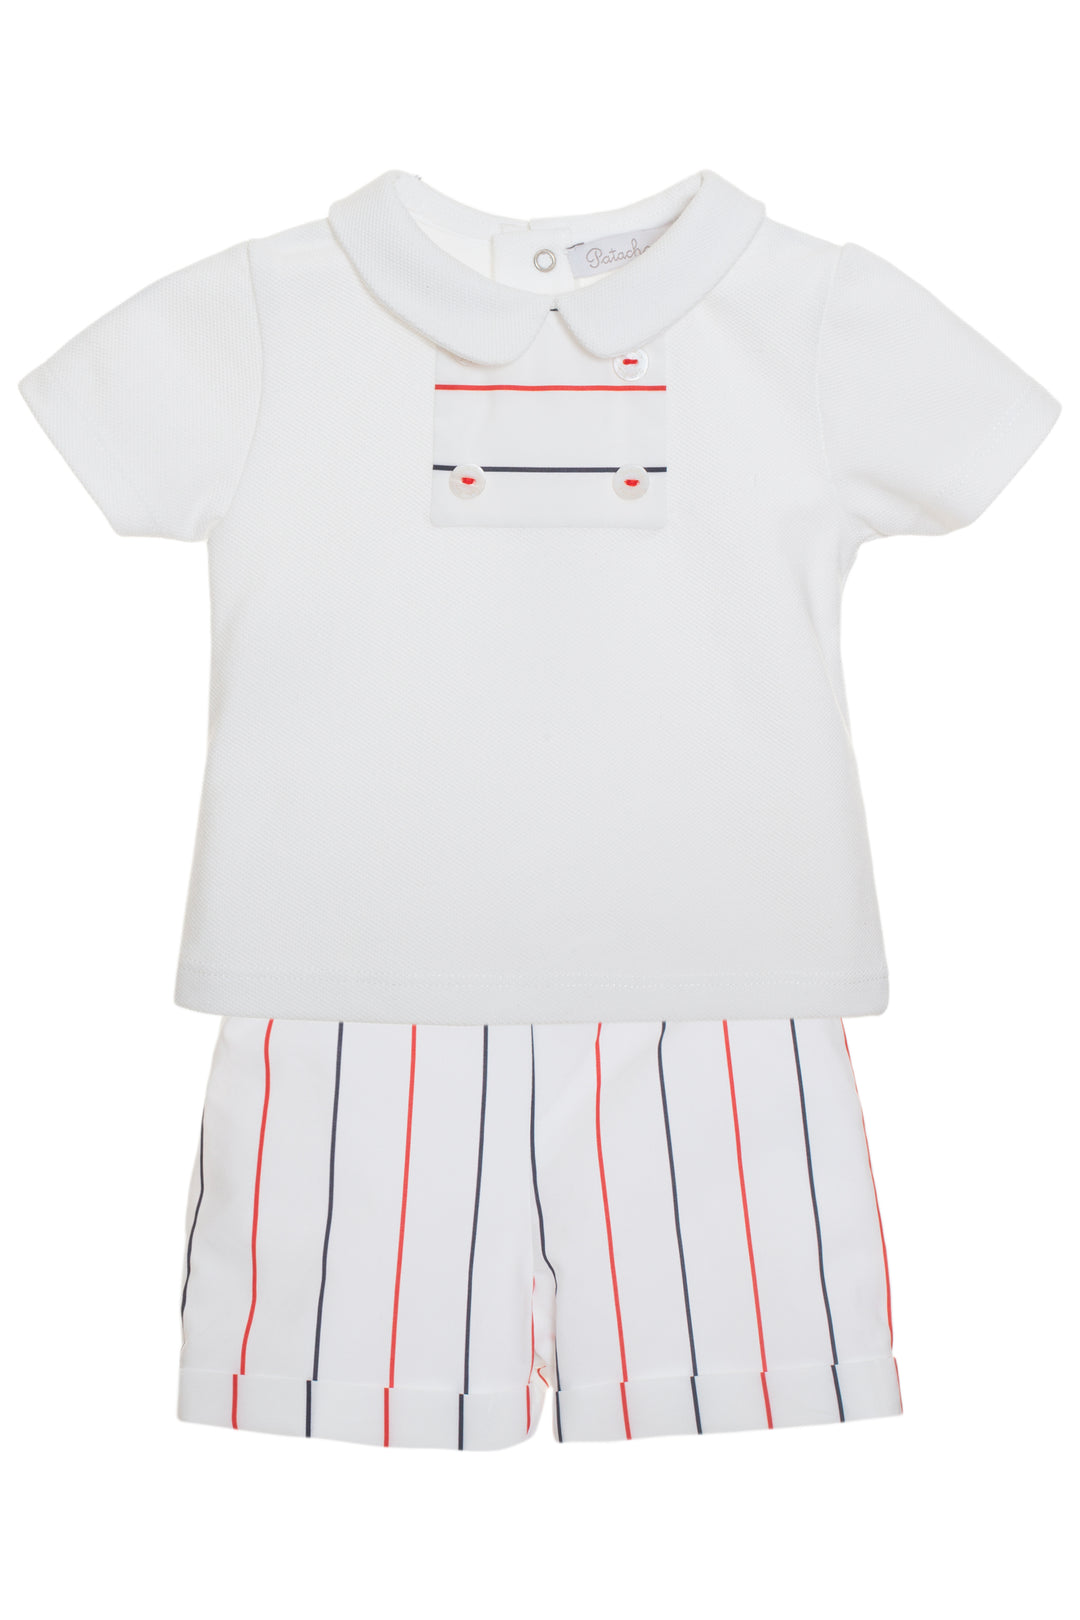 Patachou "Sonny" Red & Navy Striped Top & Shorts | Millie and John